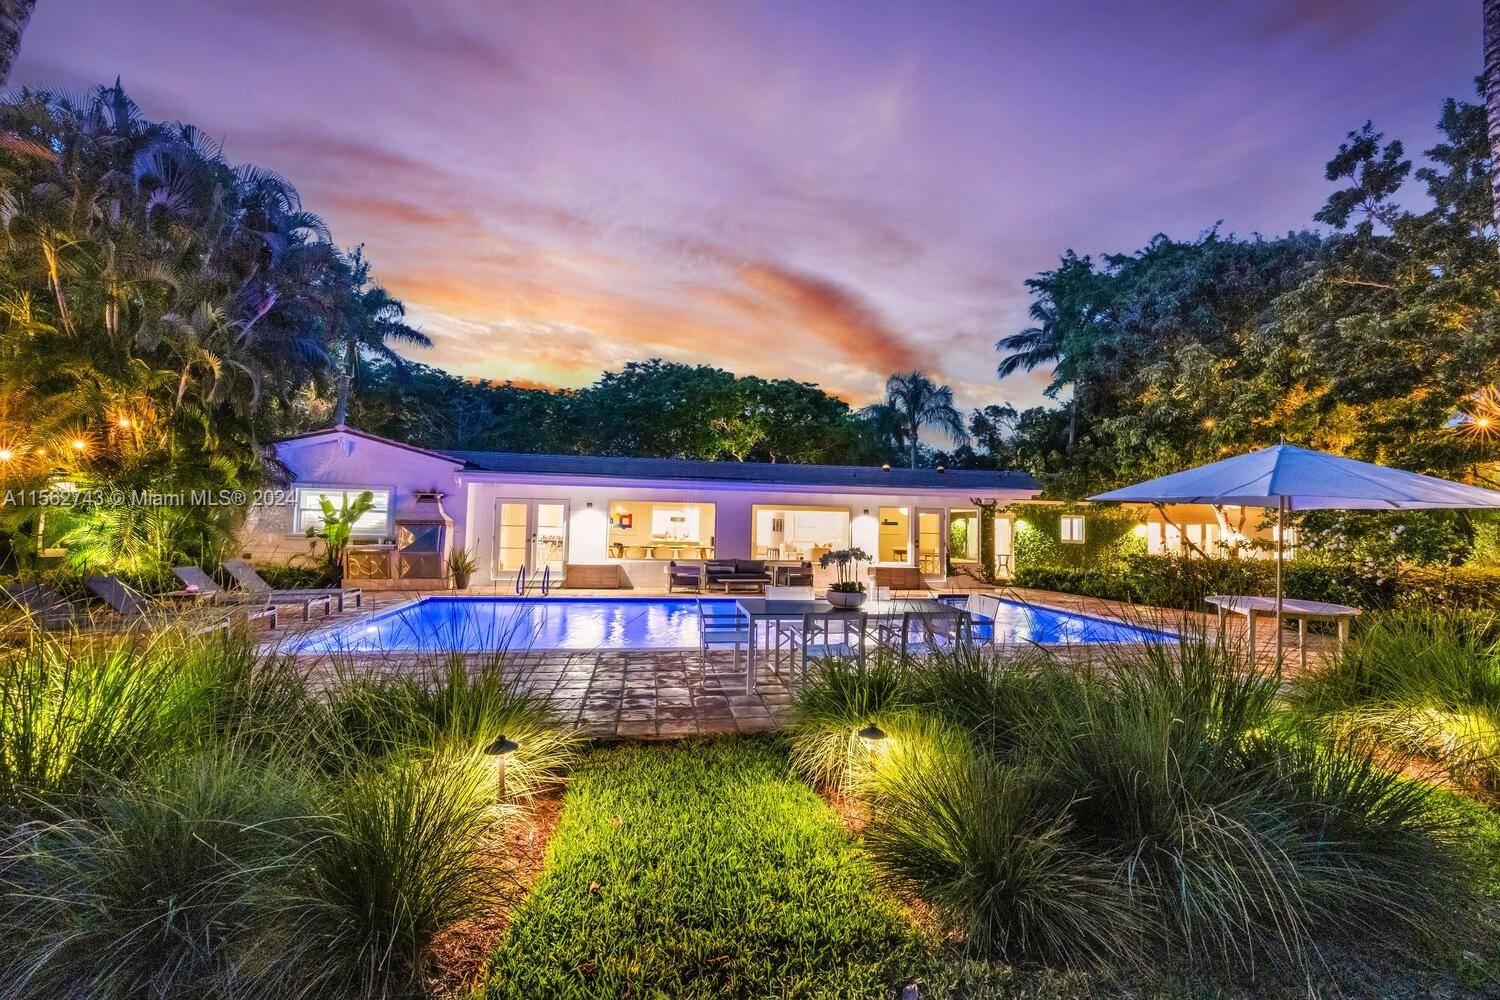 Discover a truly magical oasis, nestled in the heart of luxury in Pinecrest.